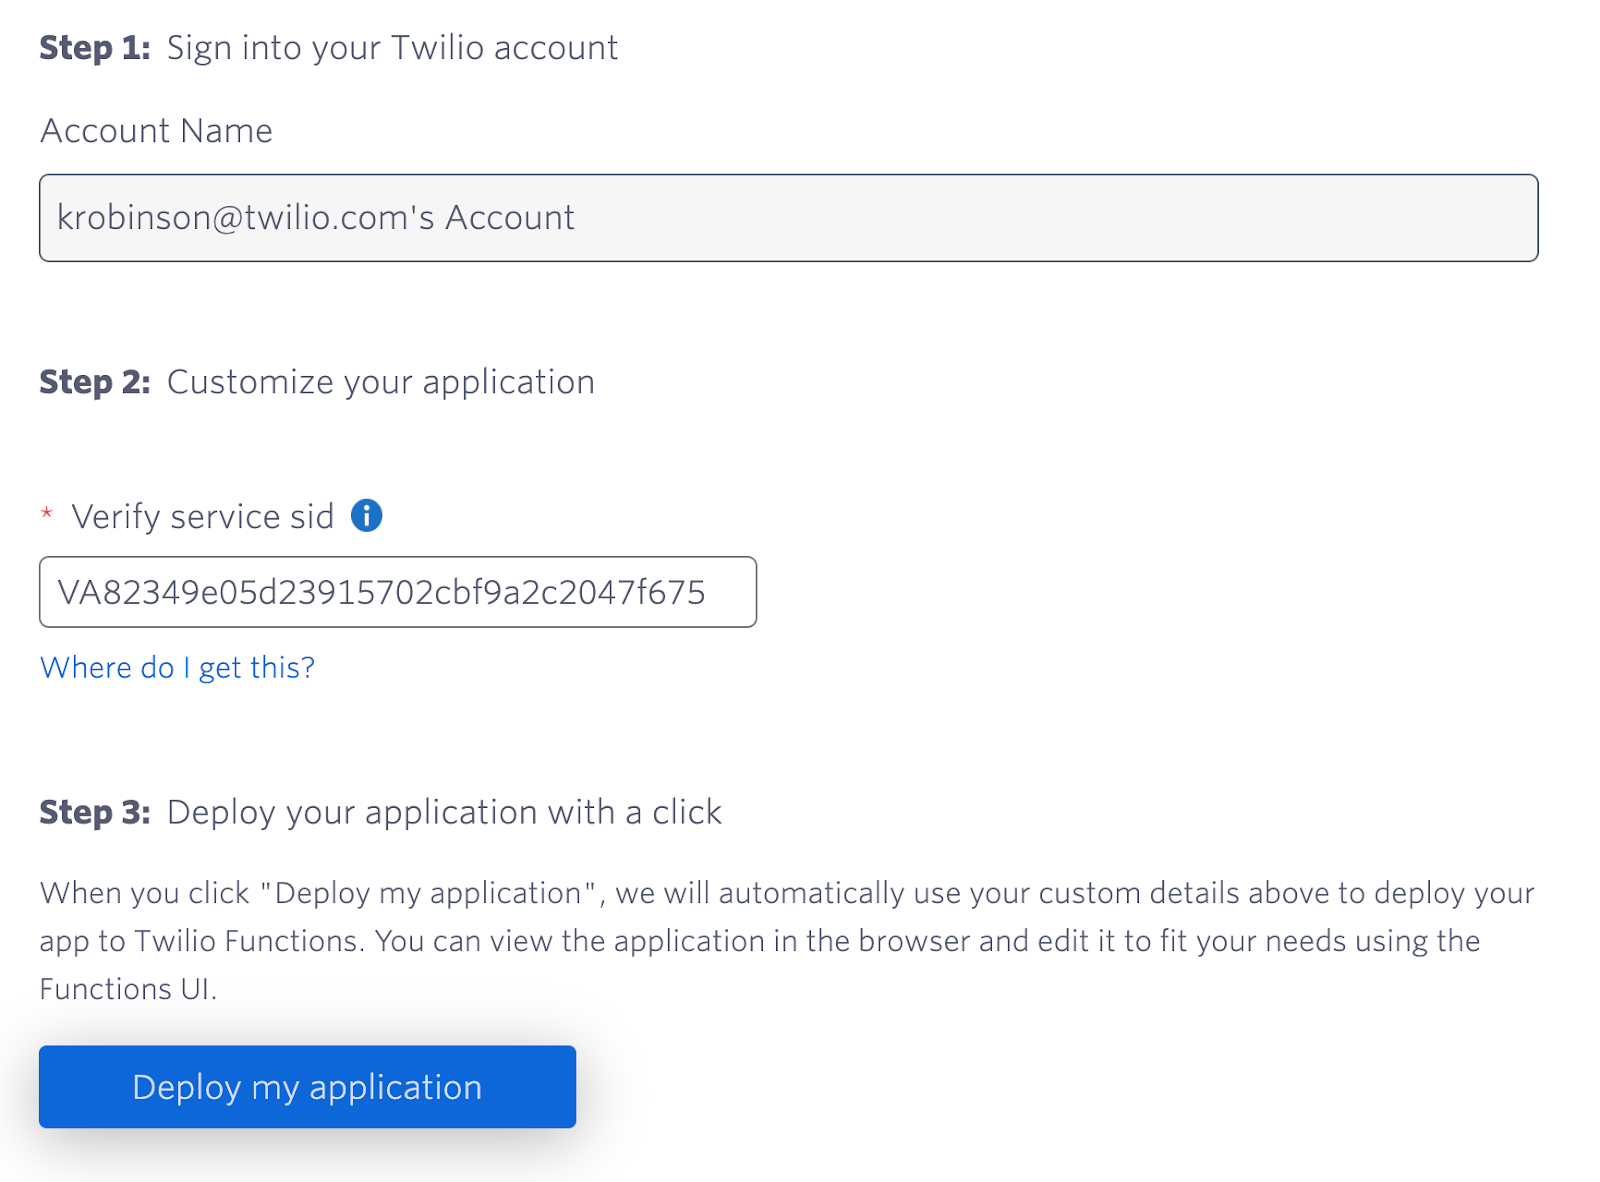 twilio quick deploy steps 1 through 3, including the field to input your verify service sid and the submit button to deploy my application